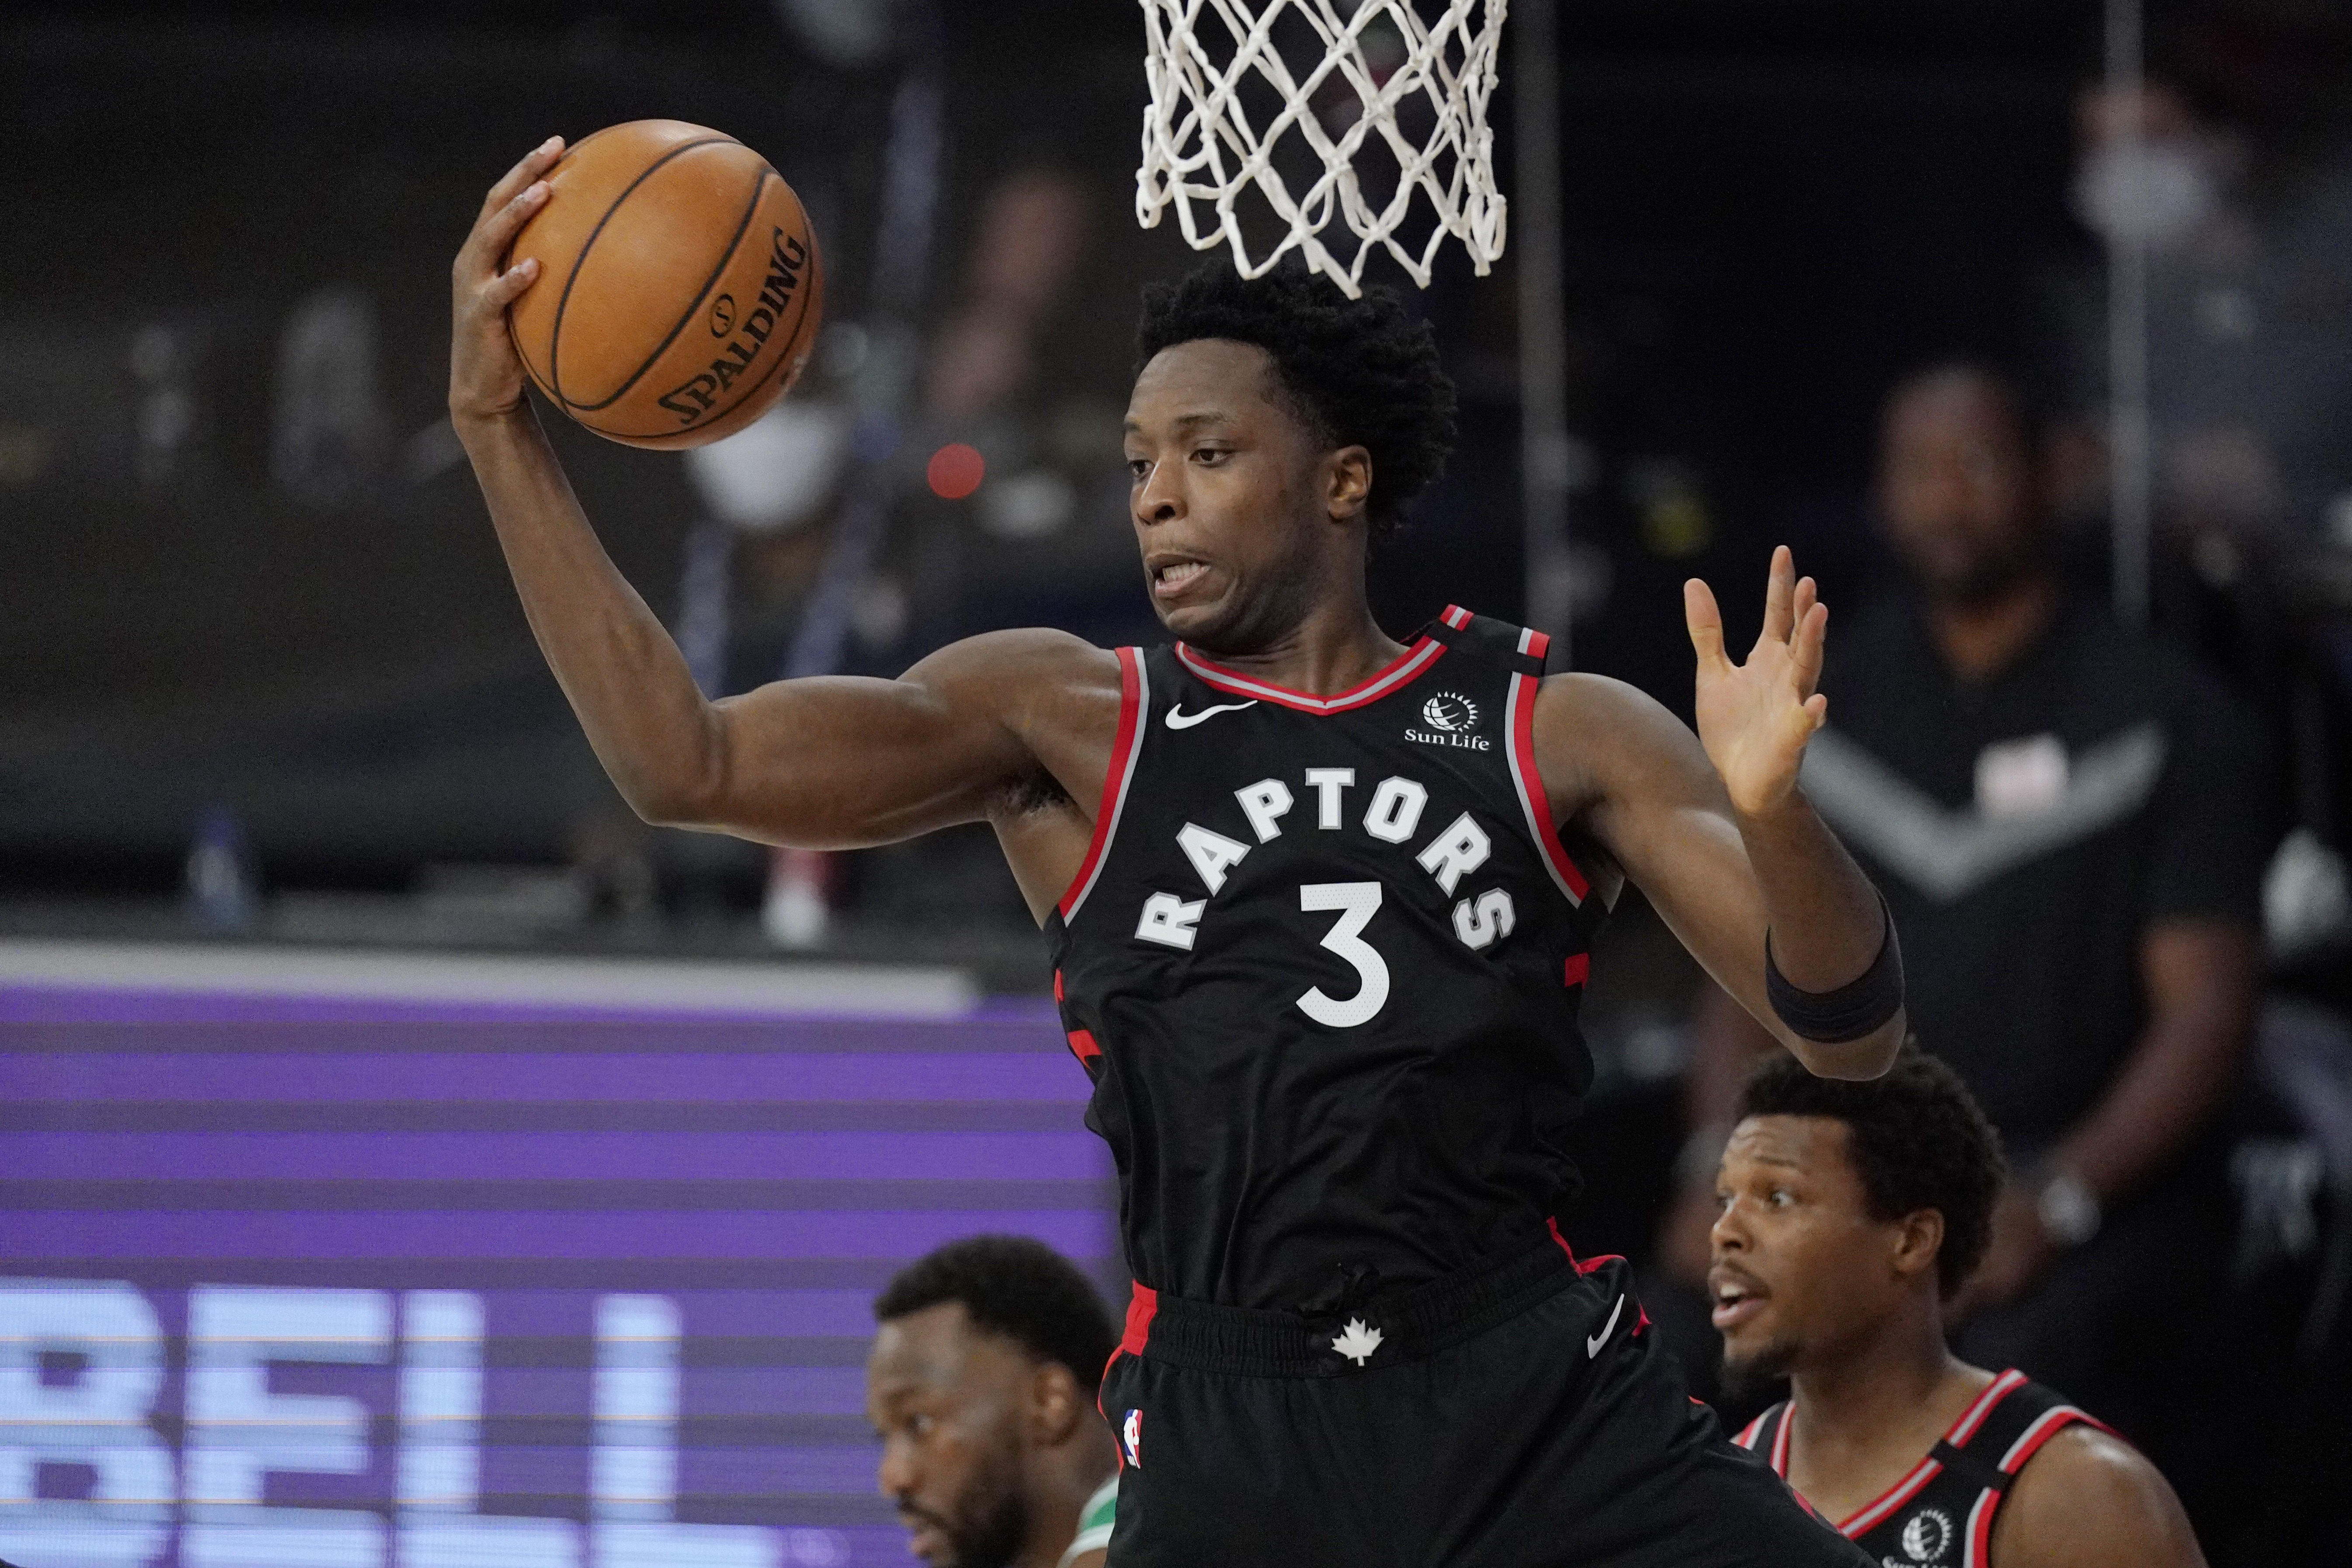 Who is OG Anunoby and who should he model his game after?